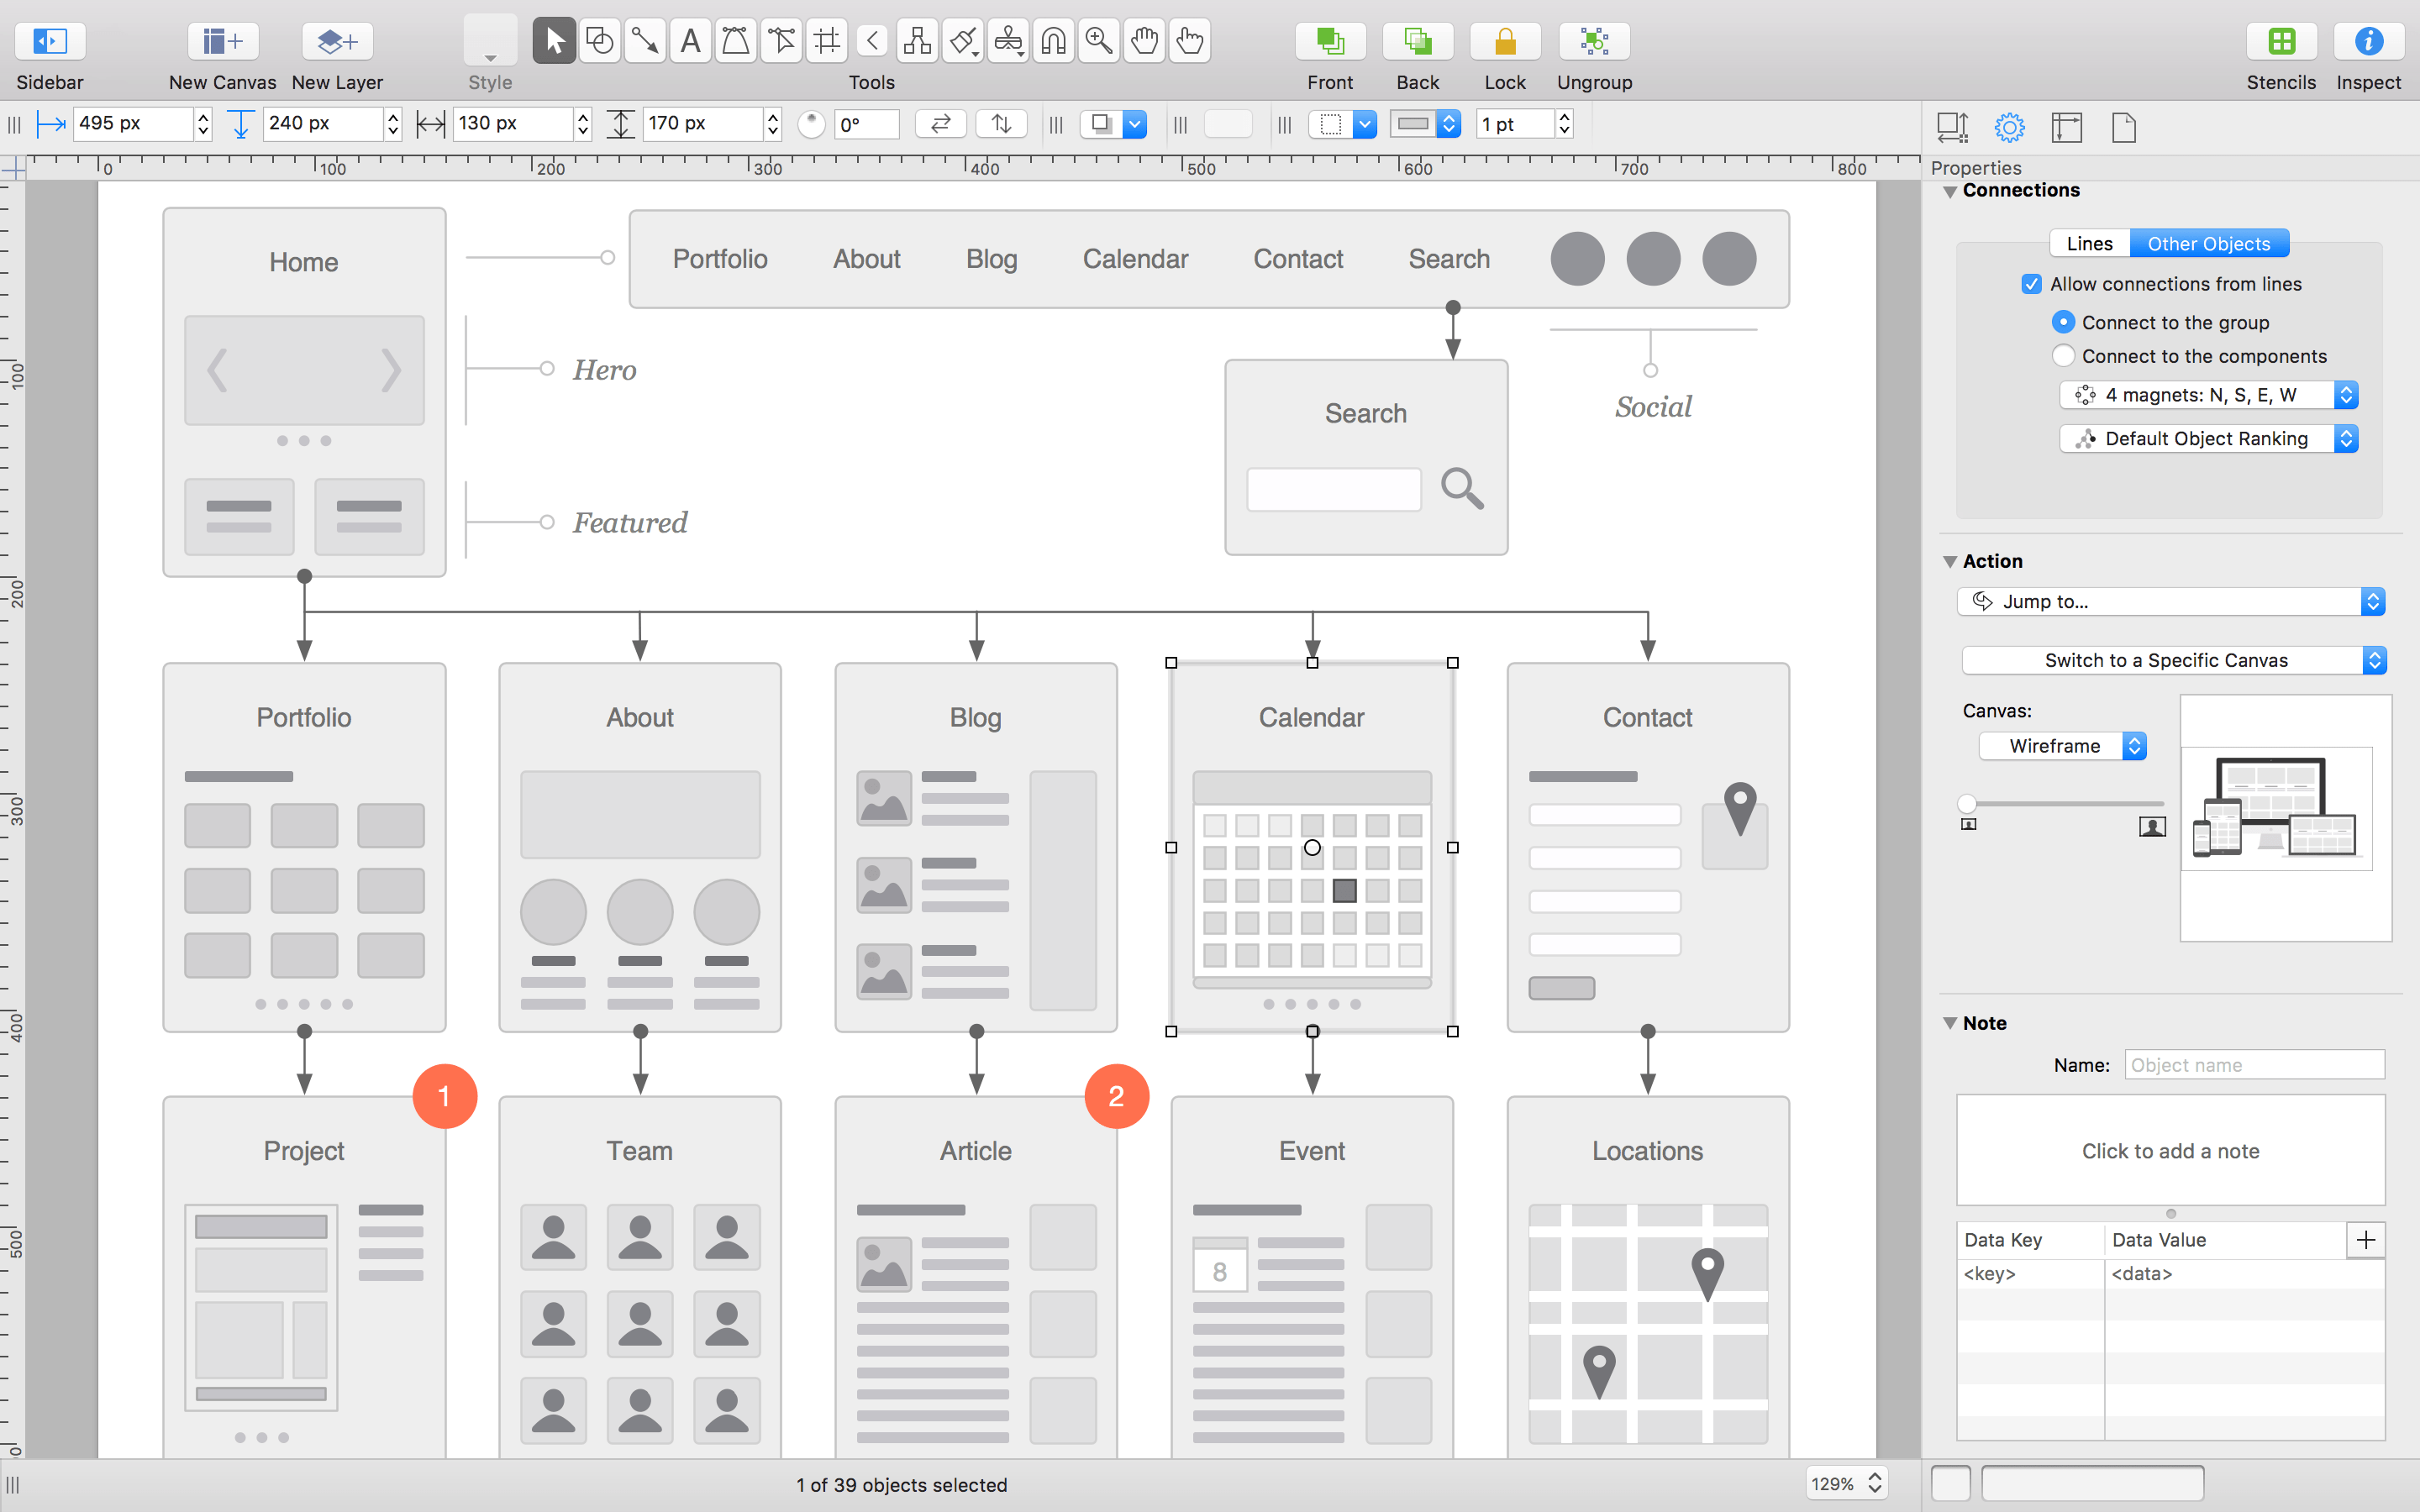 Diagramming the flow of a website with OmniGraffle.